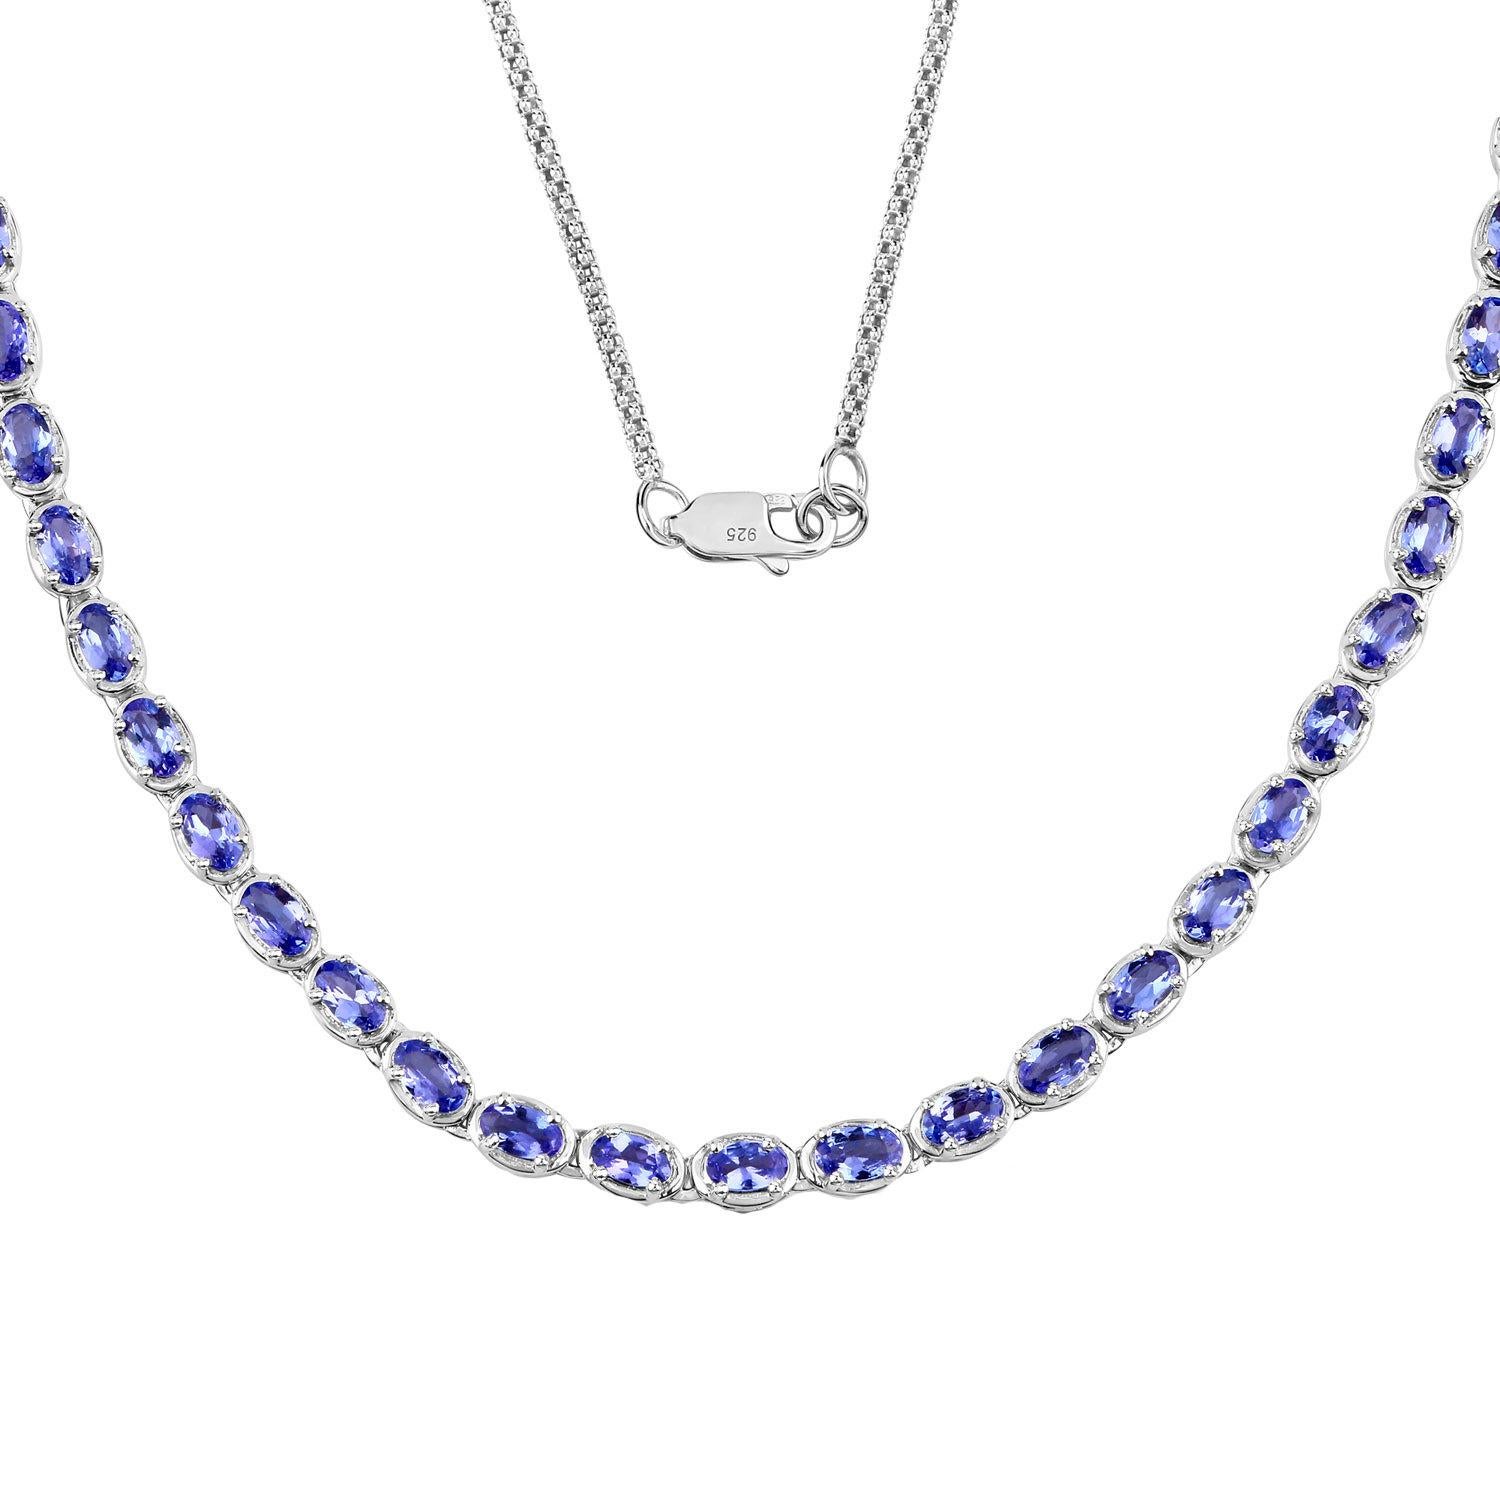 Oval Cut Tanzanite Tennis Necklace 10 Carats Sterling Silver For Sale